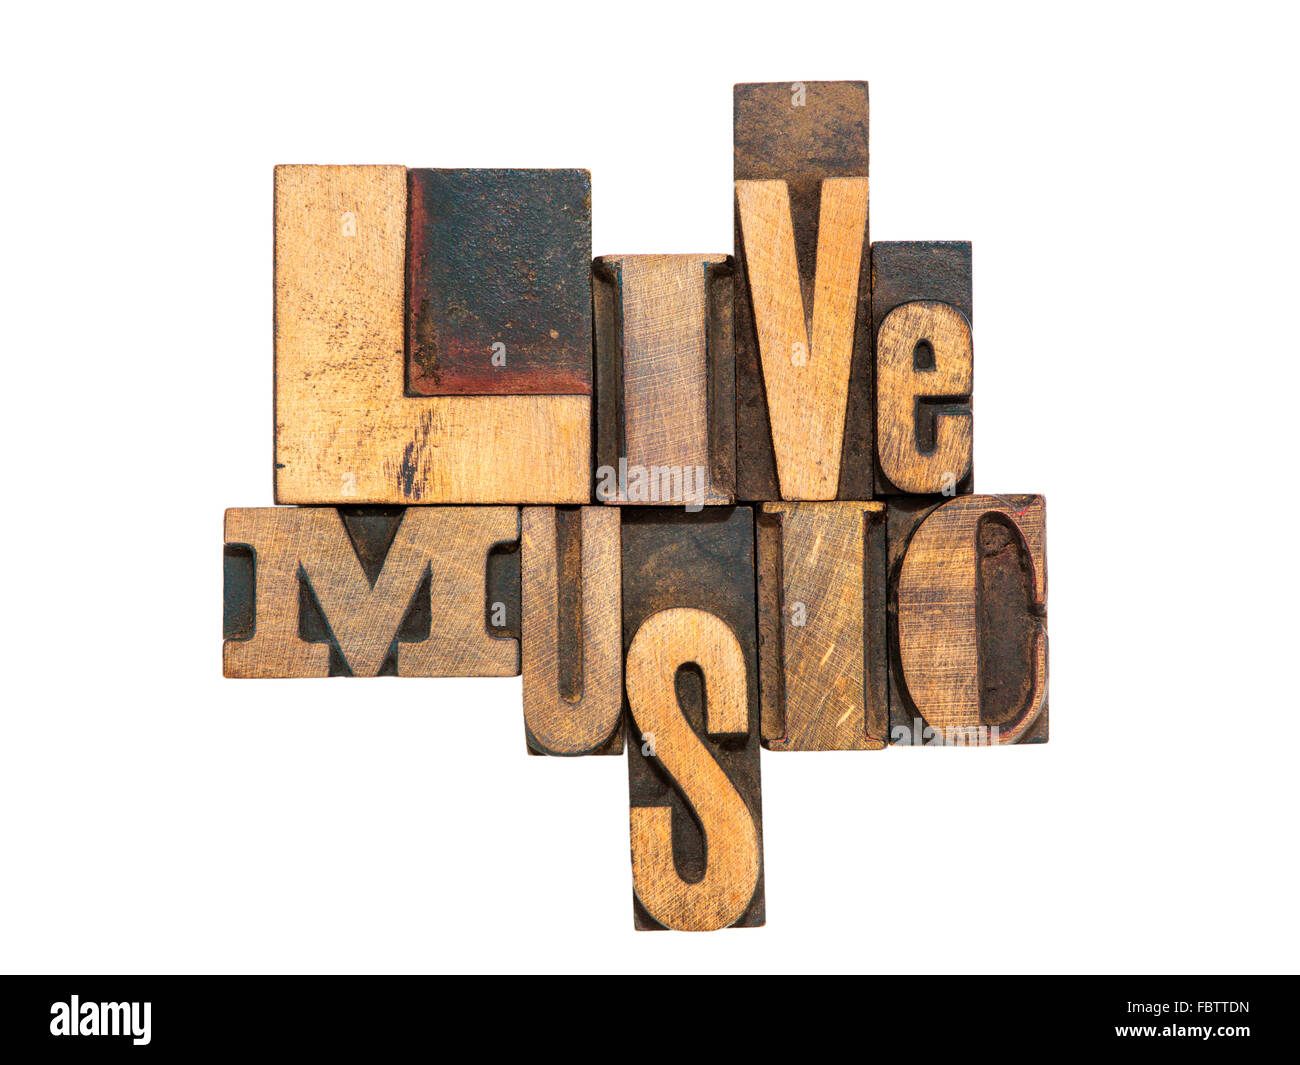 https://c8.alamy.com/comp/FBTTDN/live-music-phrase-made-from-mixed-wooden-letterpress-type-isolated-FBTTDN.jpg